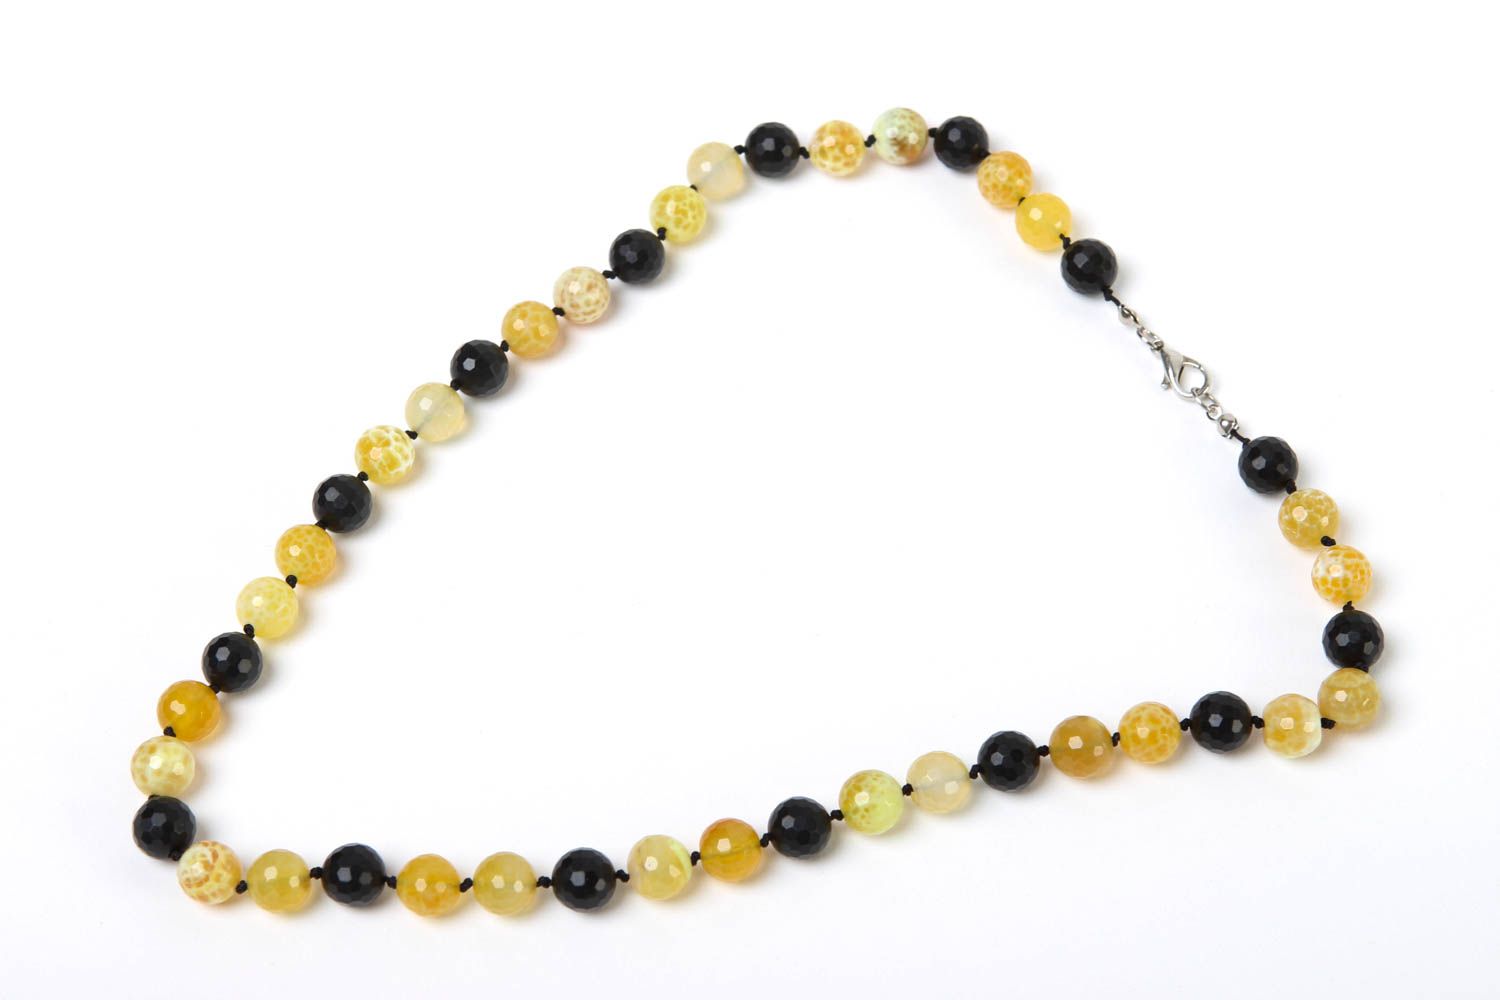 Bead necklace gemstone jewelry handmade necklace fashion accessories for women photo 2